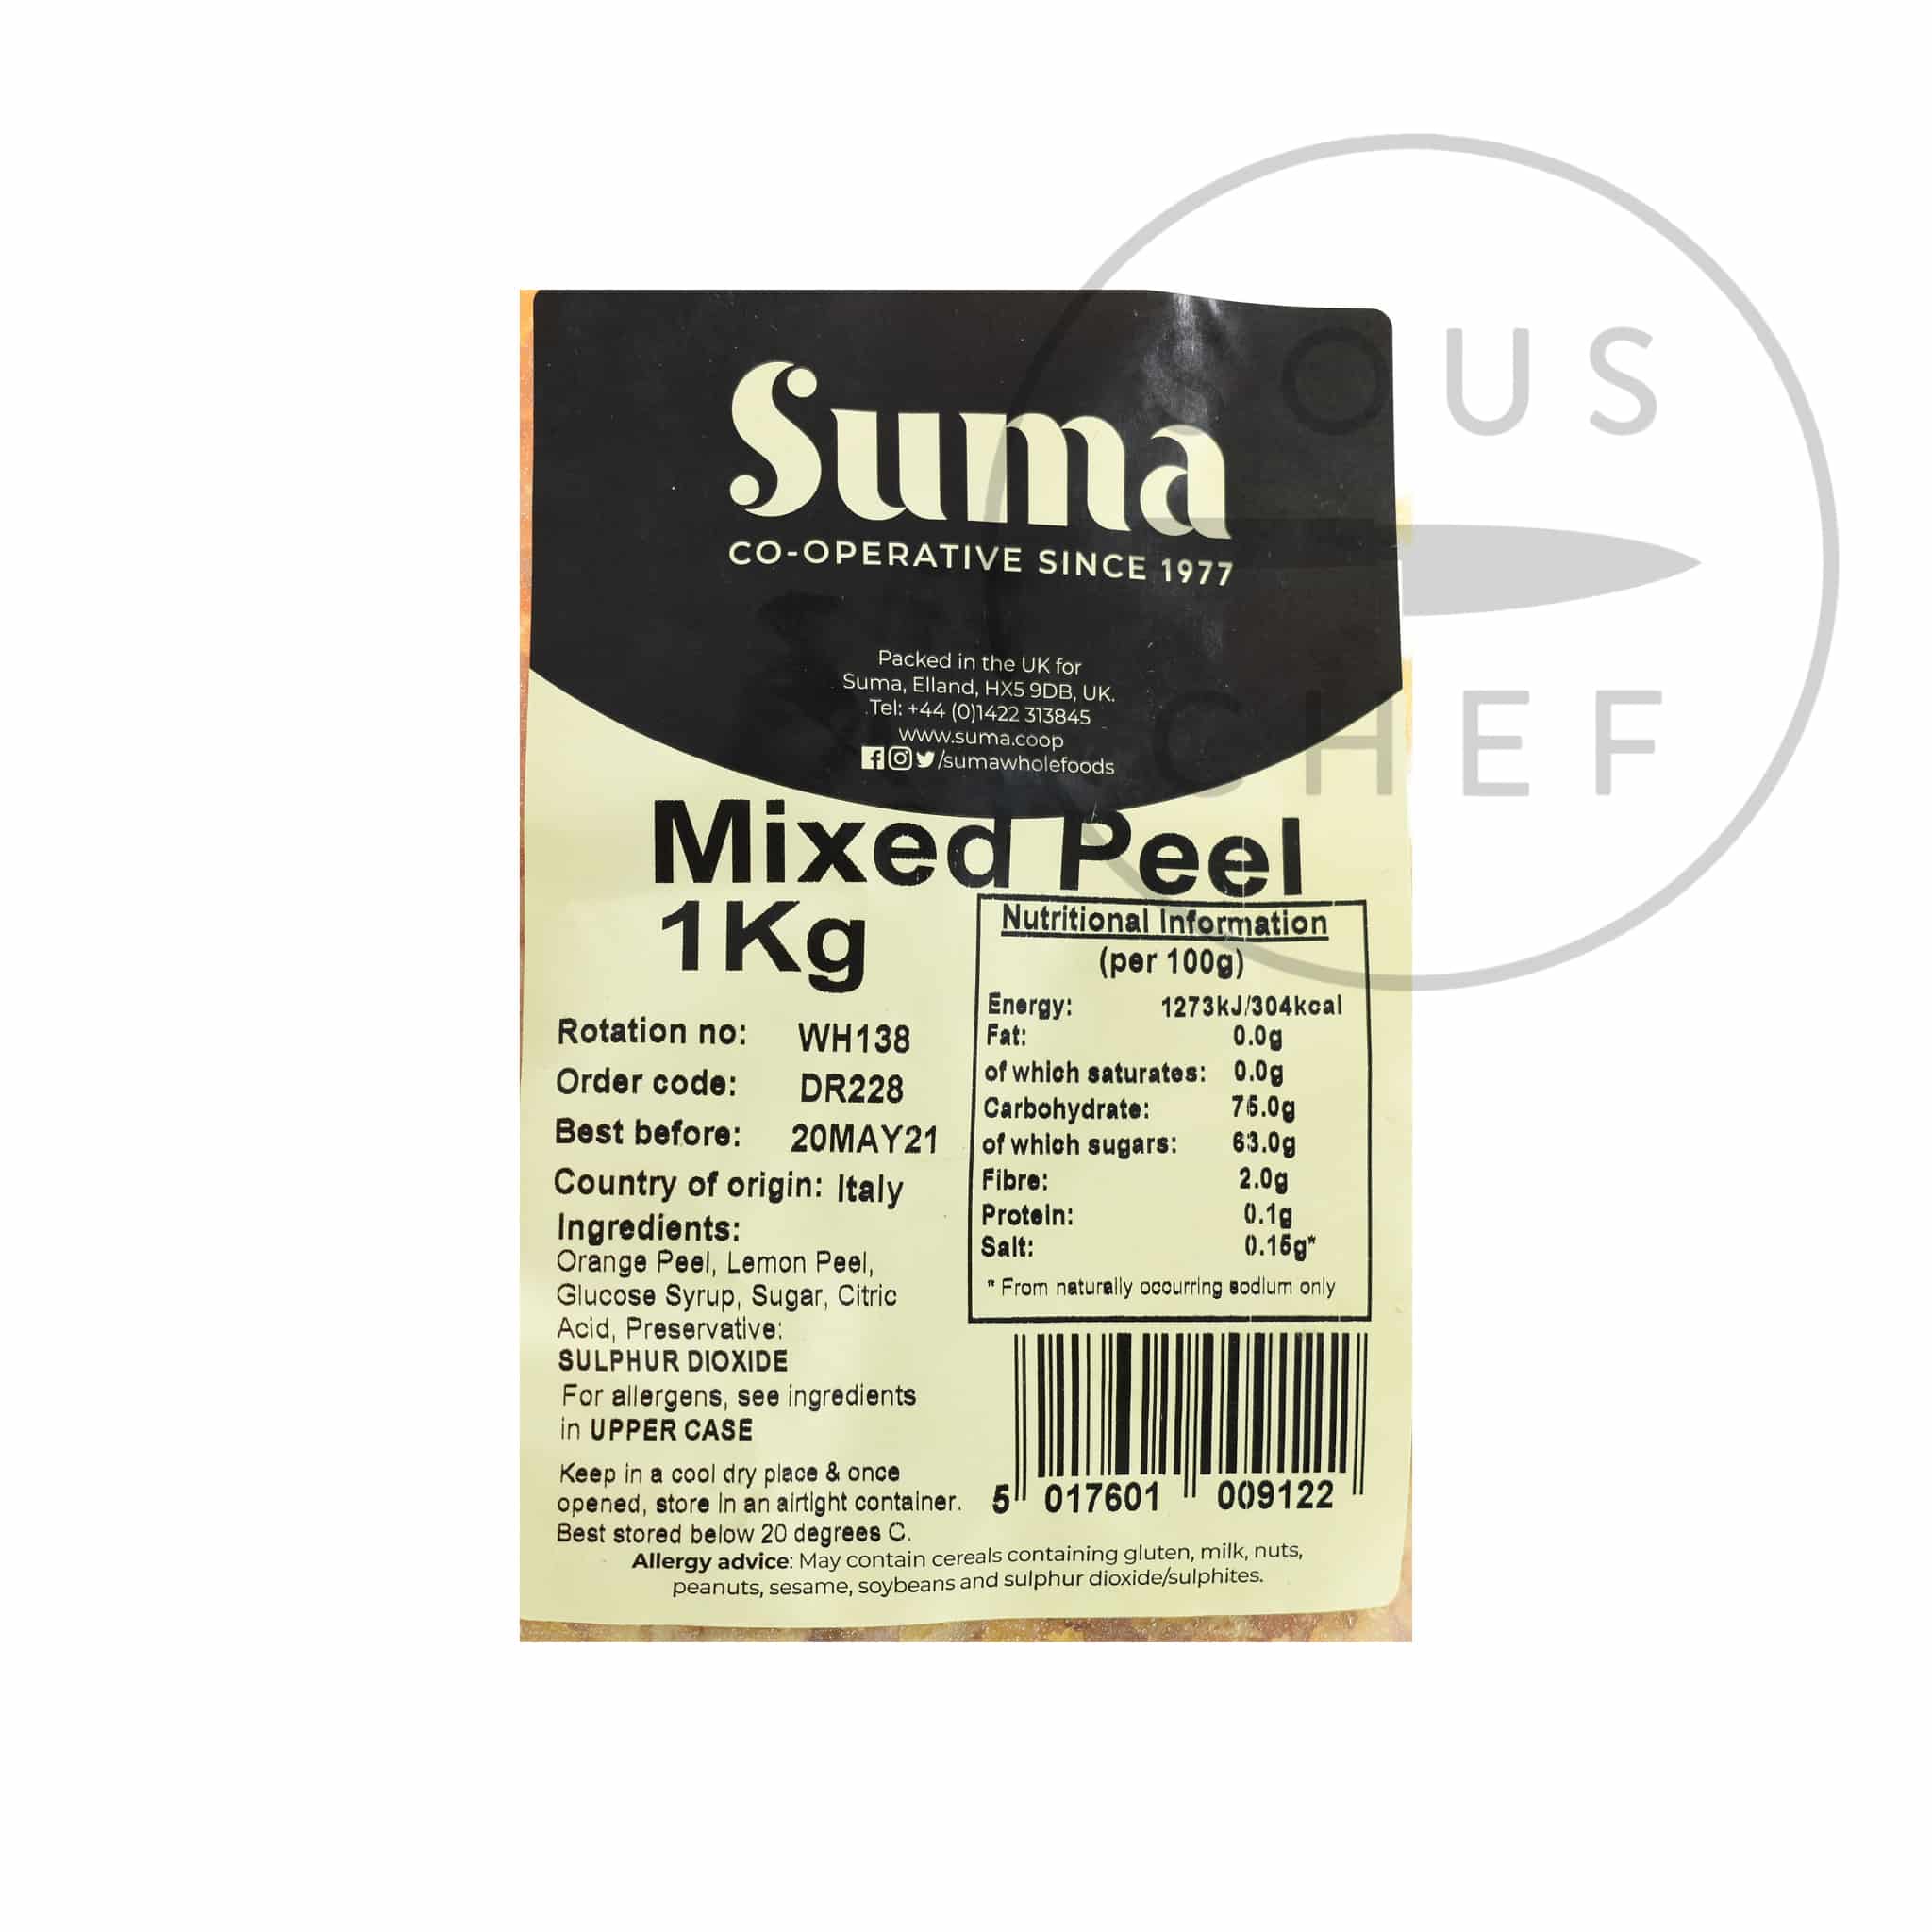 Mixed Peel 1kg back of pack